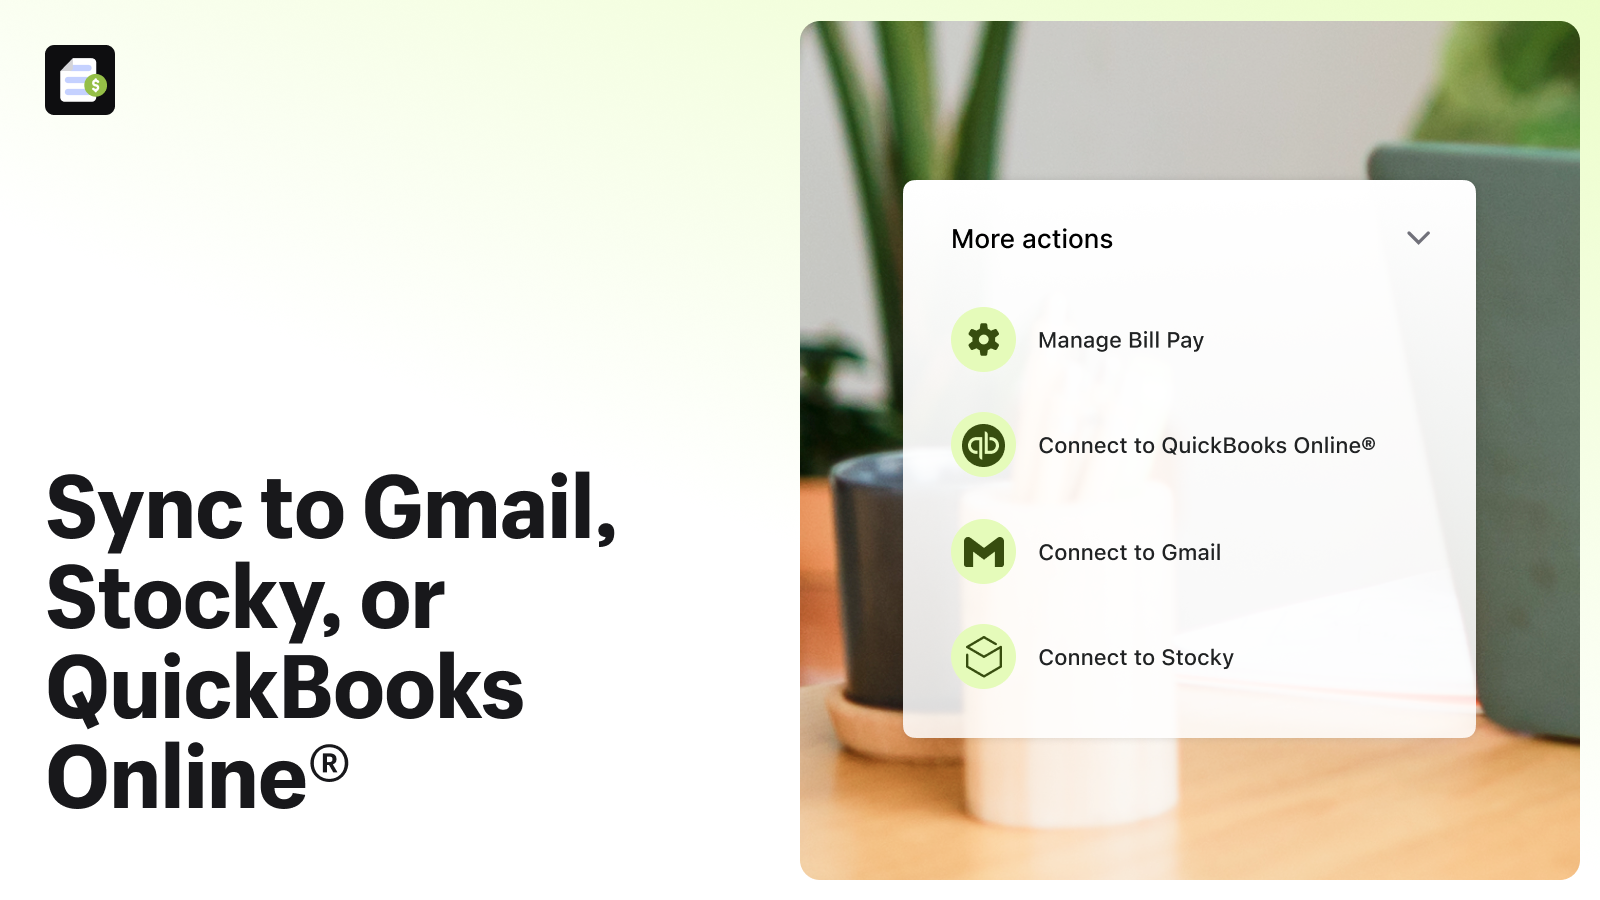 Sync to Gmail, Stocky, or QuickBooks Online